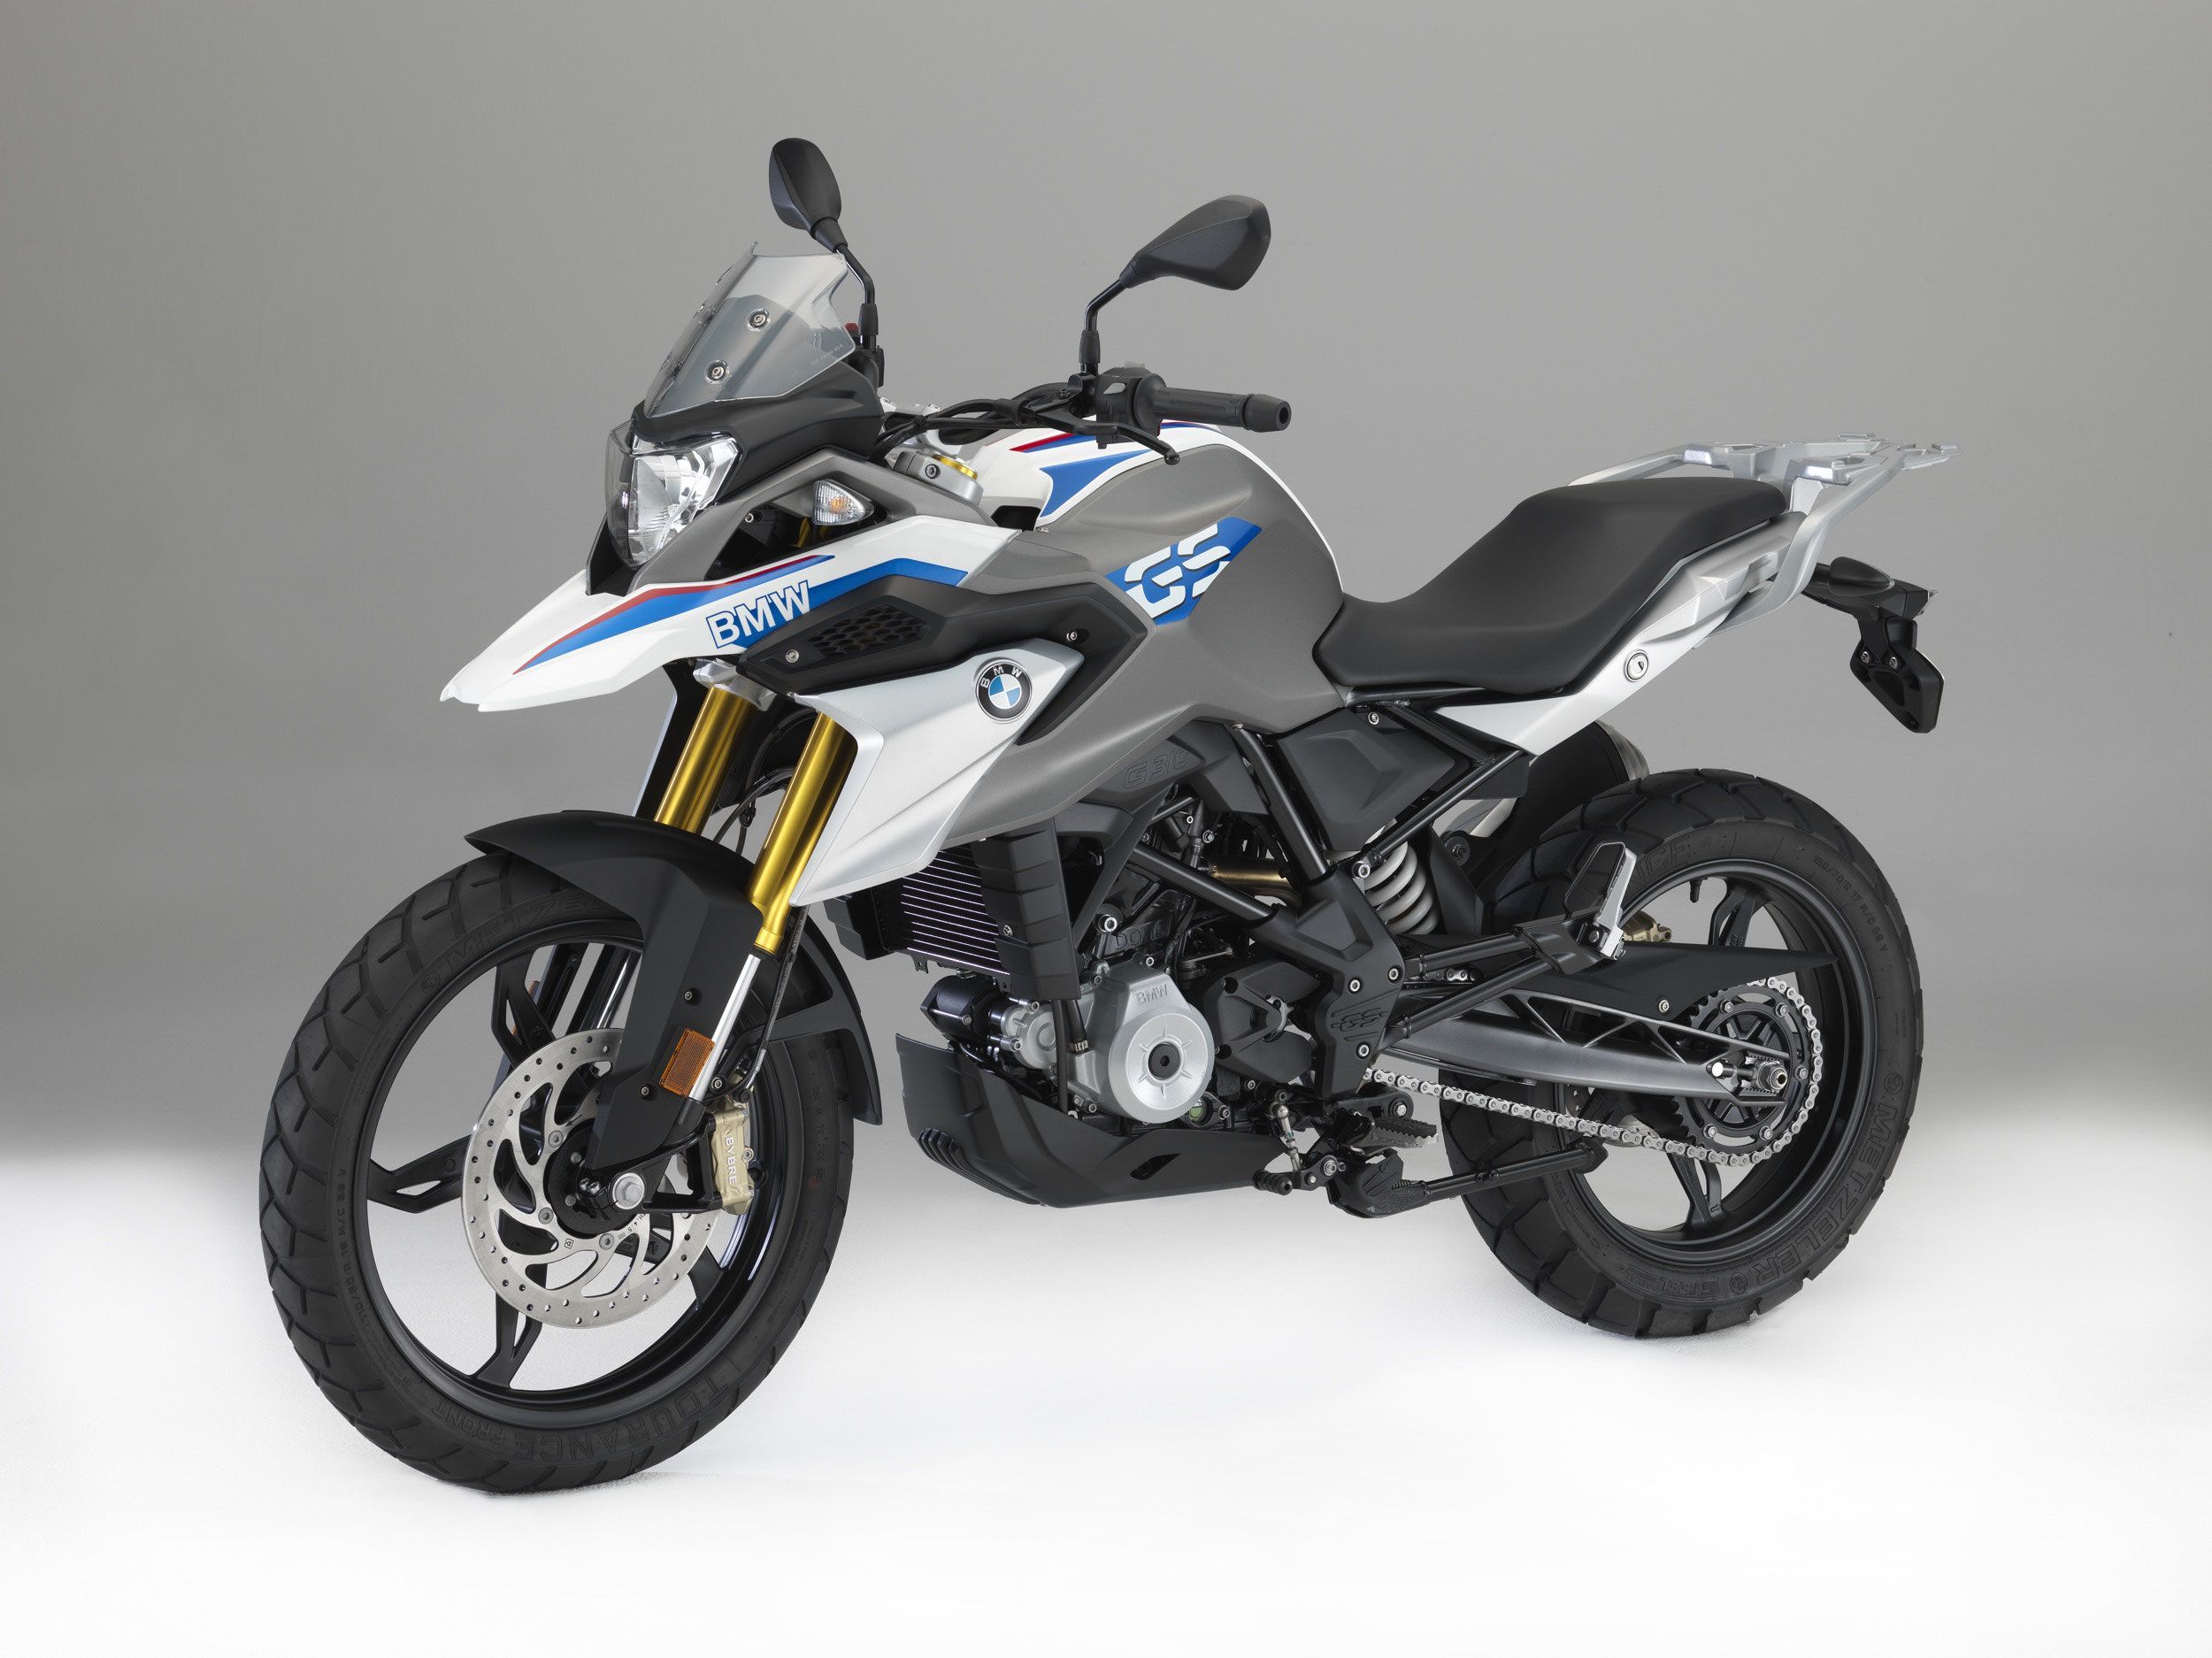 BMW G 310 GS - Known for their large capacity adventure touring